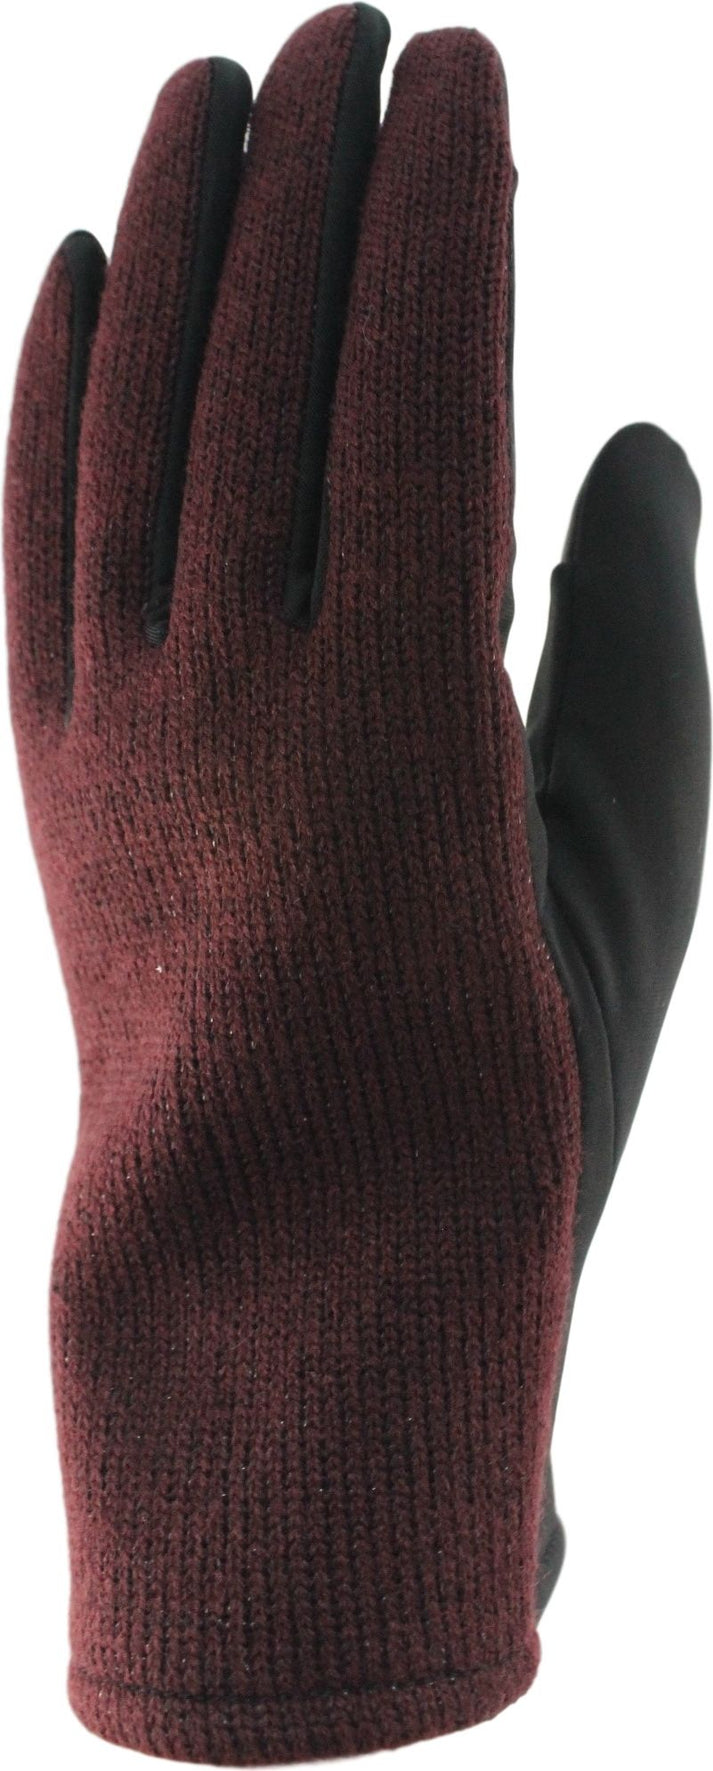 Sterling Glove Accessories Knit Spandex Palm Touch Leather Patch C40 Thinsulate Fig